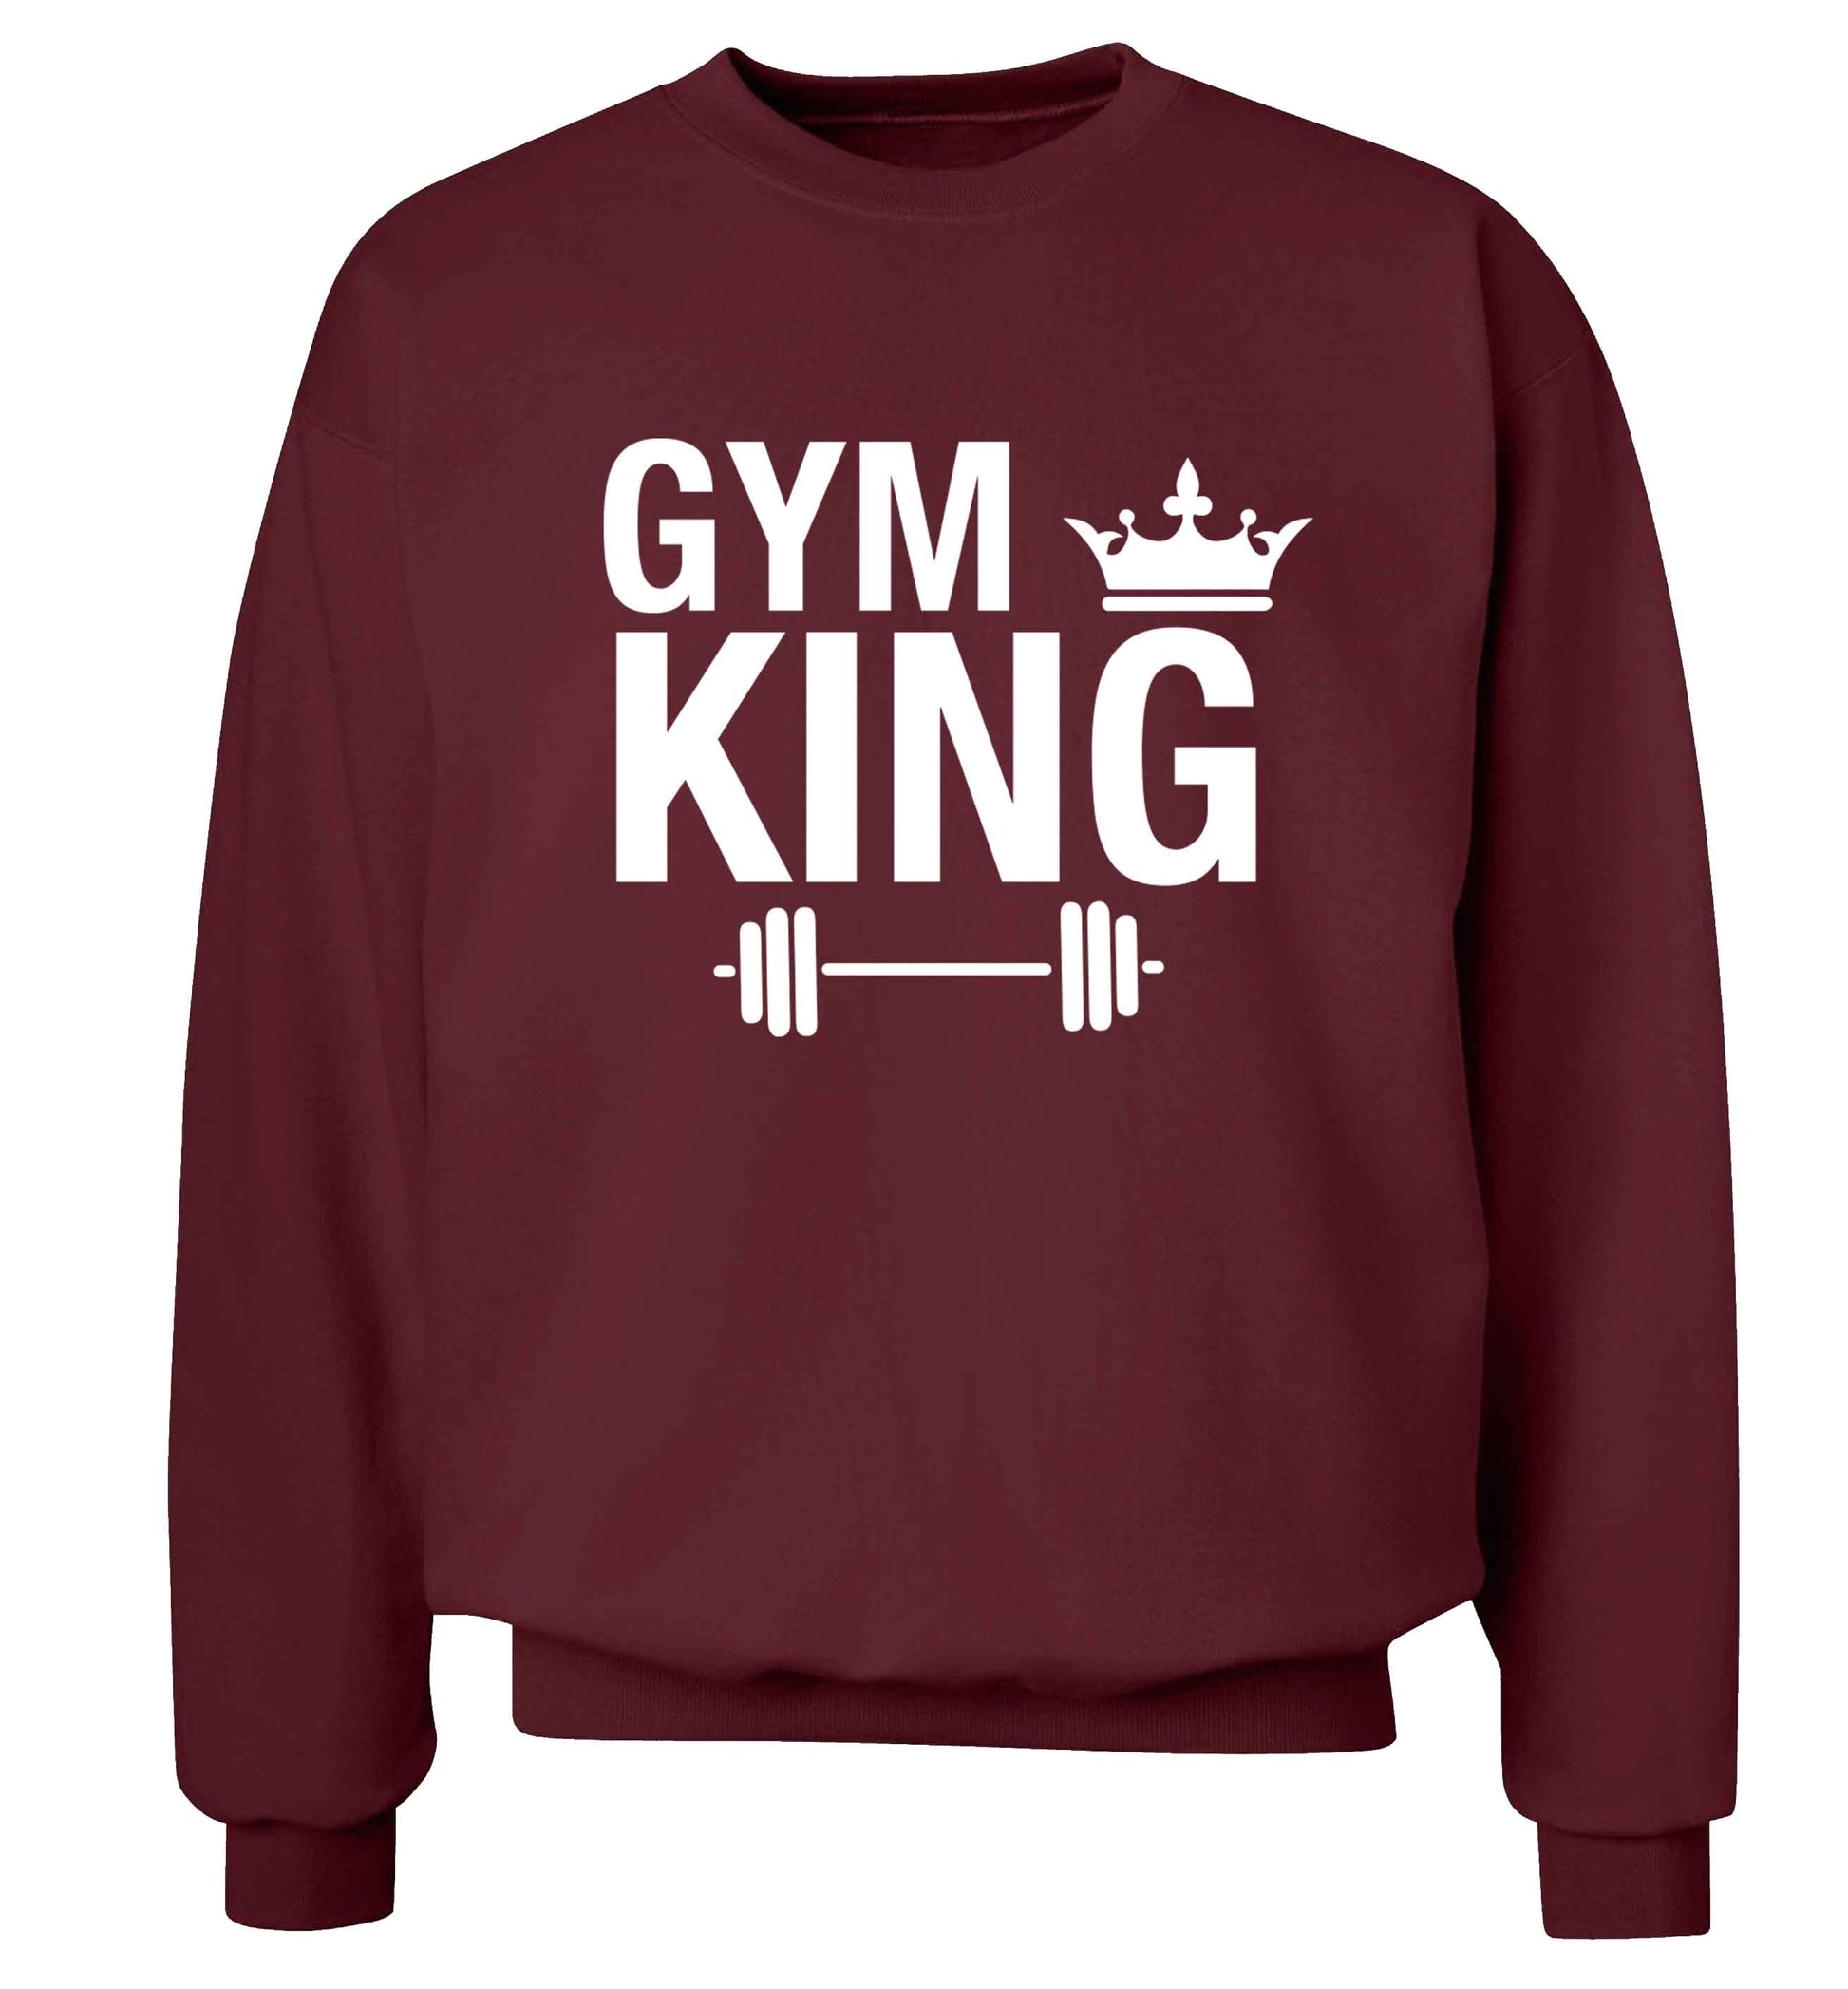 Gym king Adult's unisex maroon Sweater 2XL